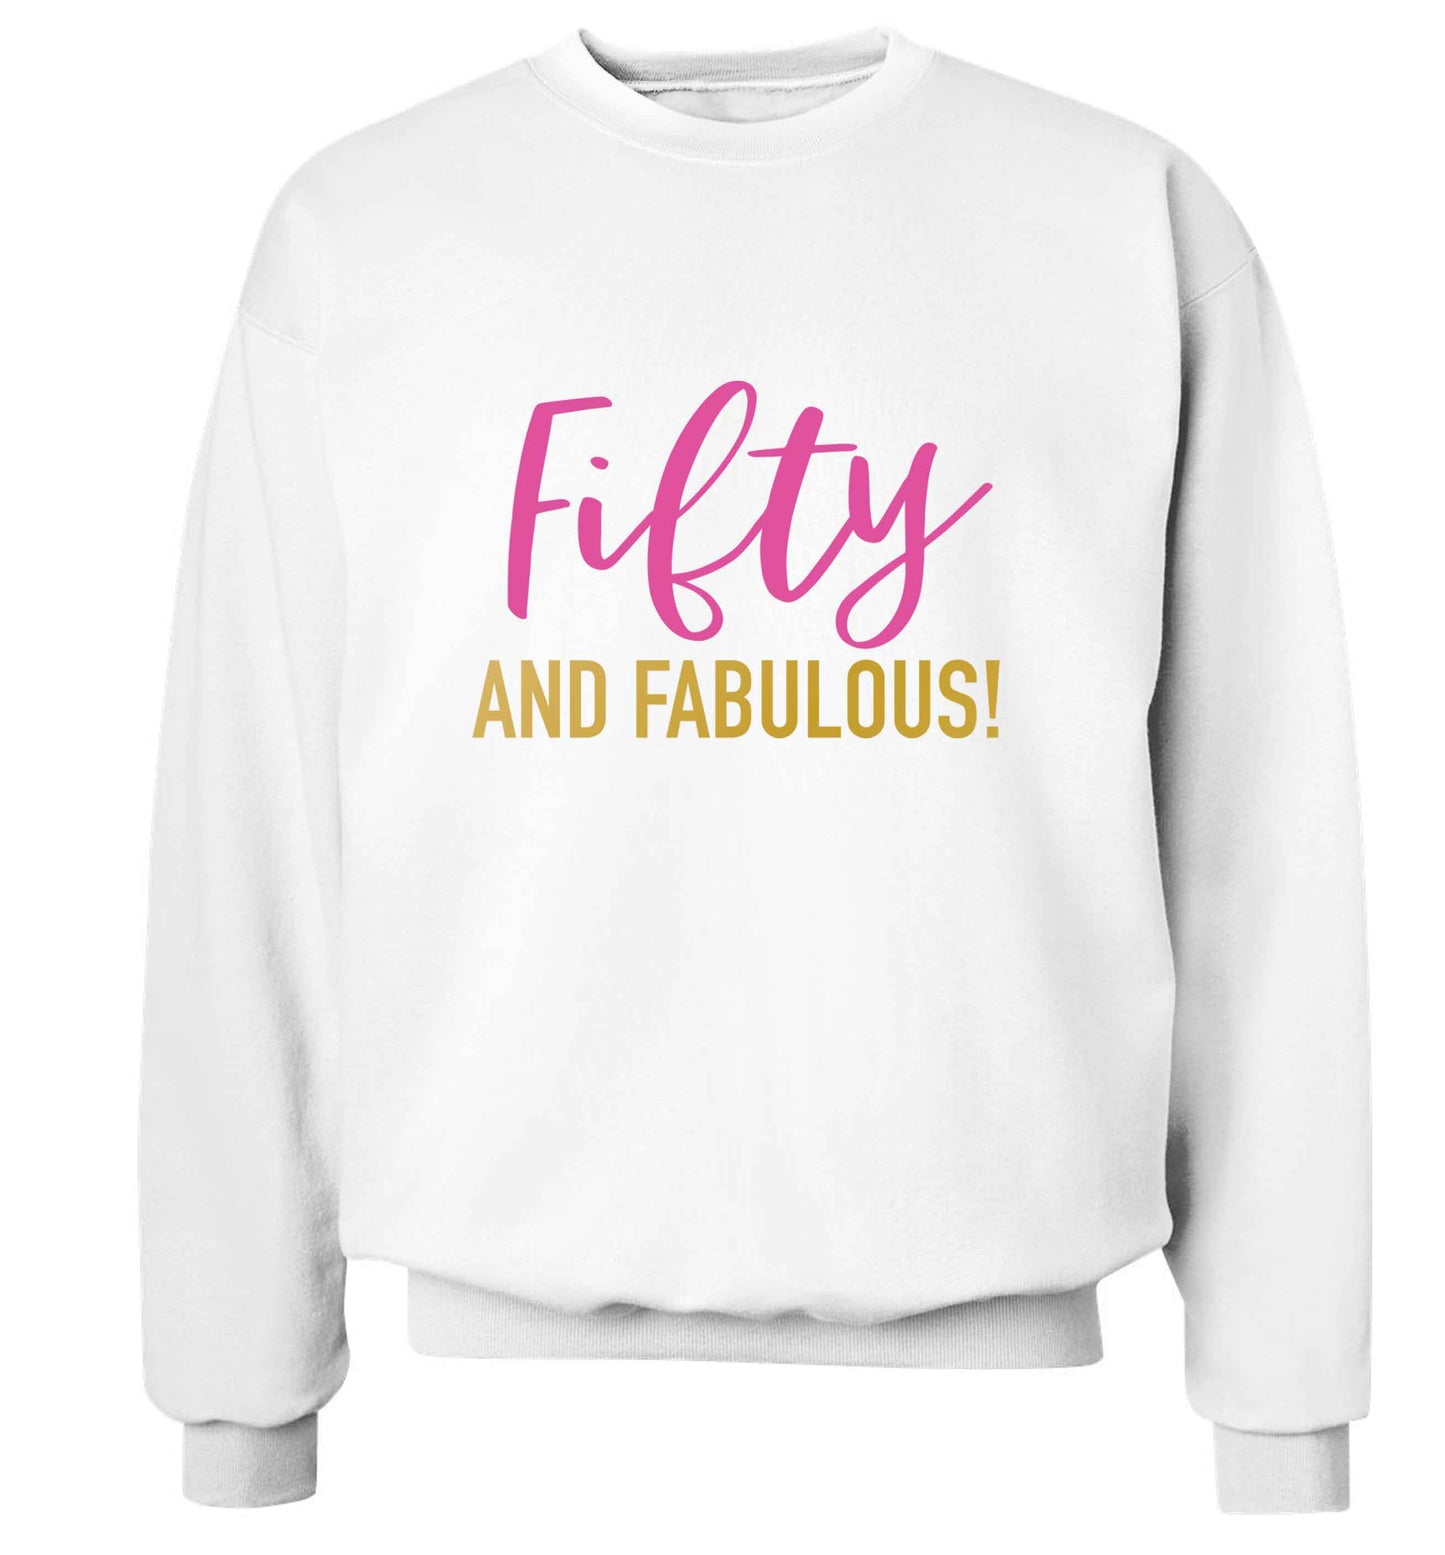 Fifty and fabulous adult's unisex white sweater 2XL